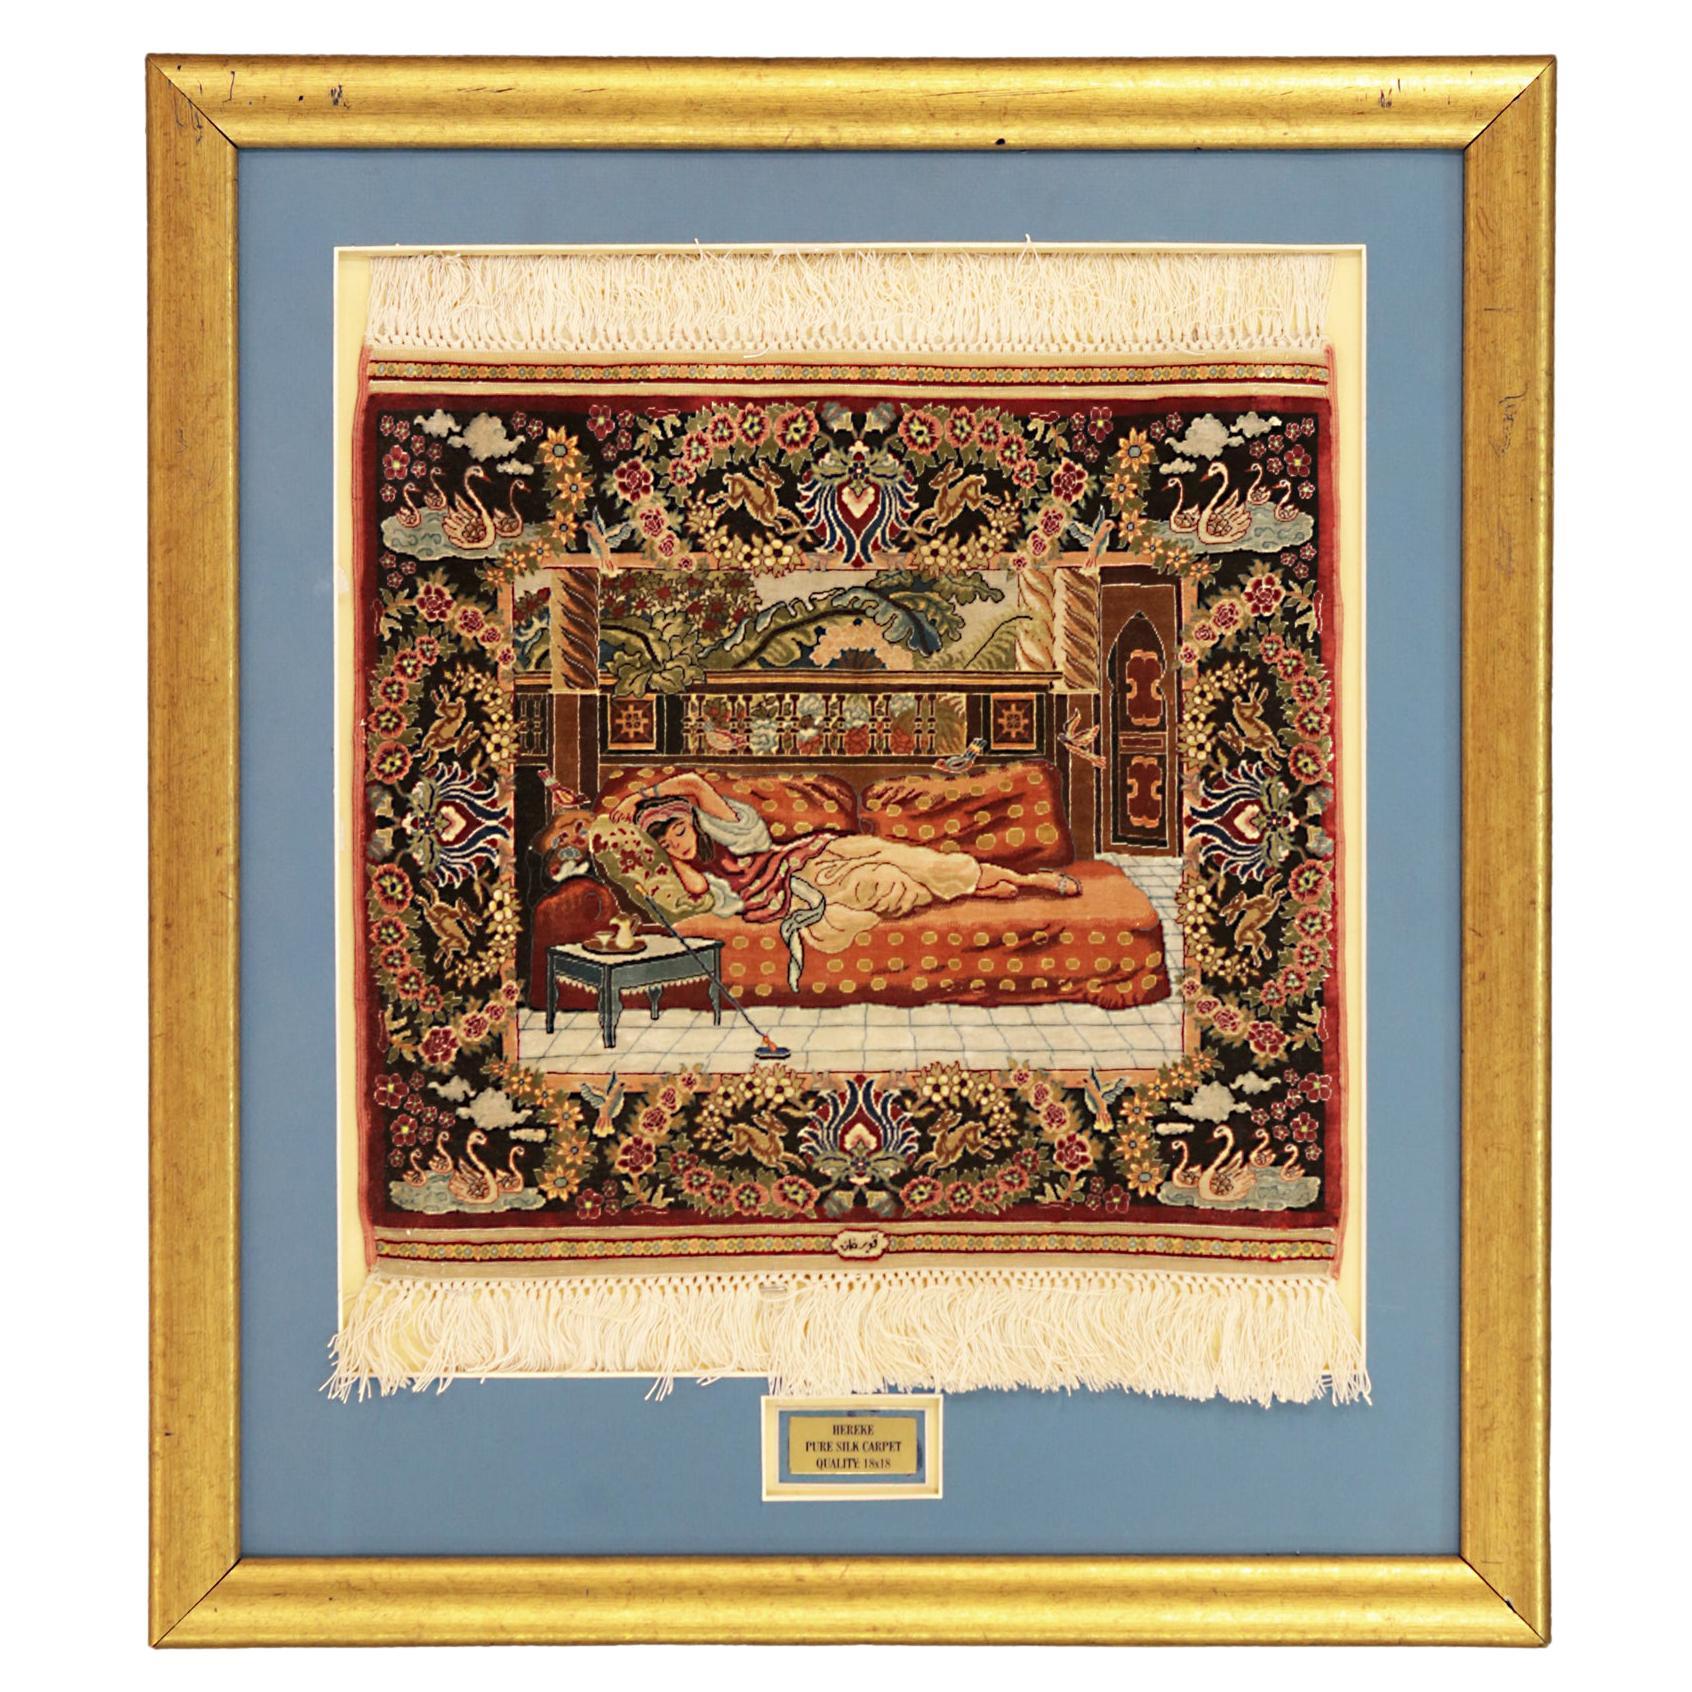 Turkish Hereke Lady Resting On a Chaise Lounge Couch Design Silk Rug, 1970-2000 For Sale